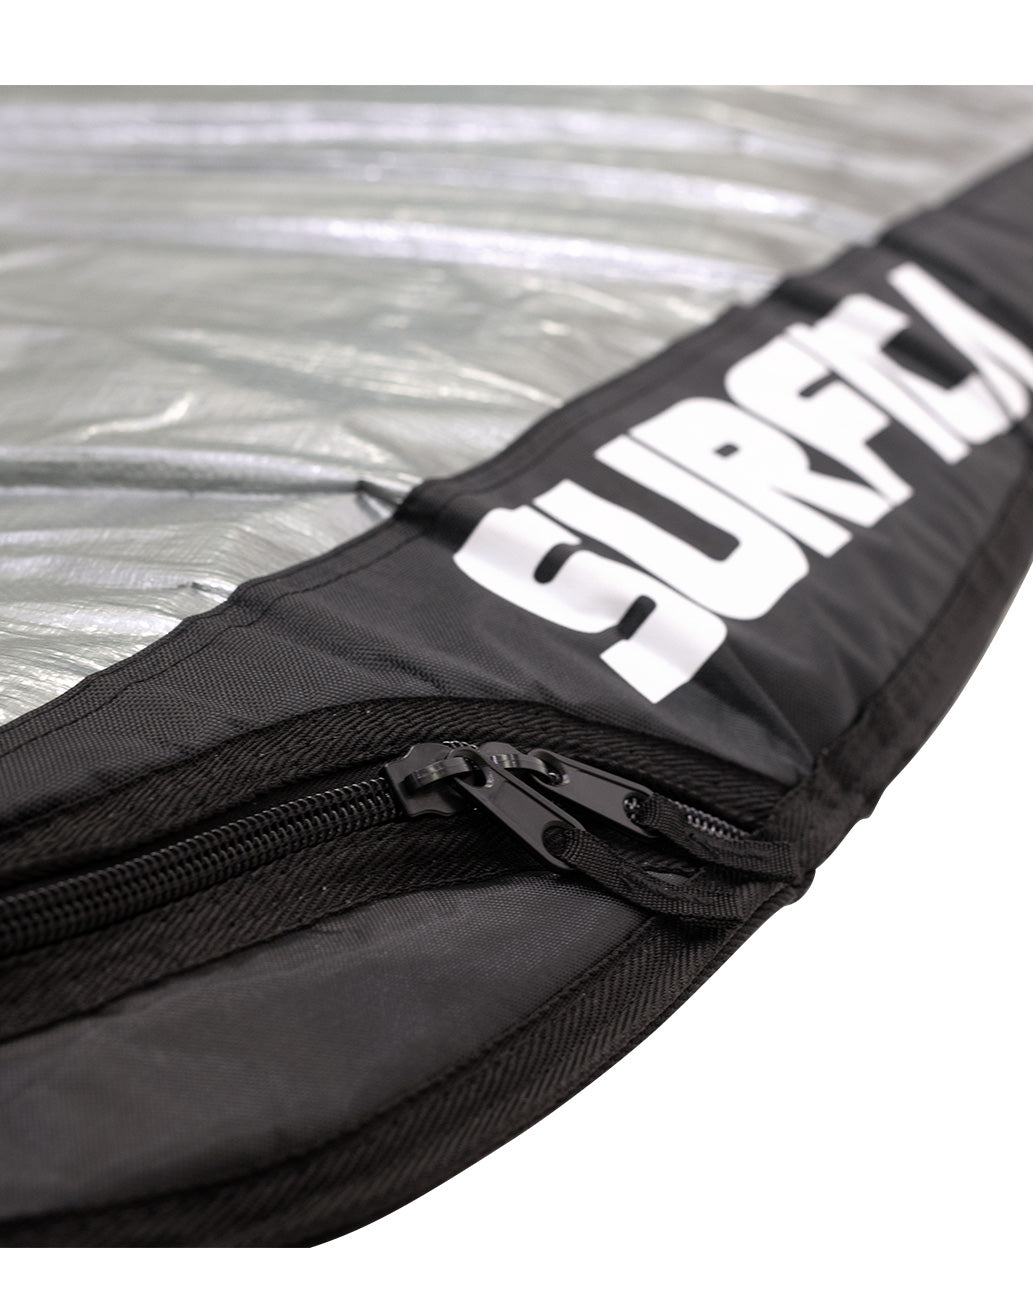 surfica all round stand up paddleboard bag